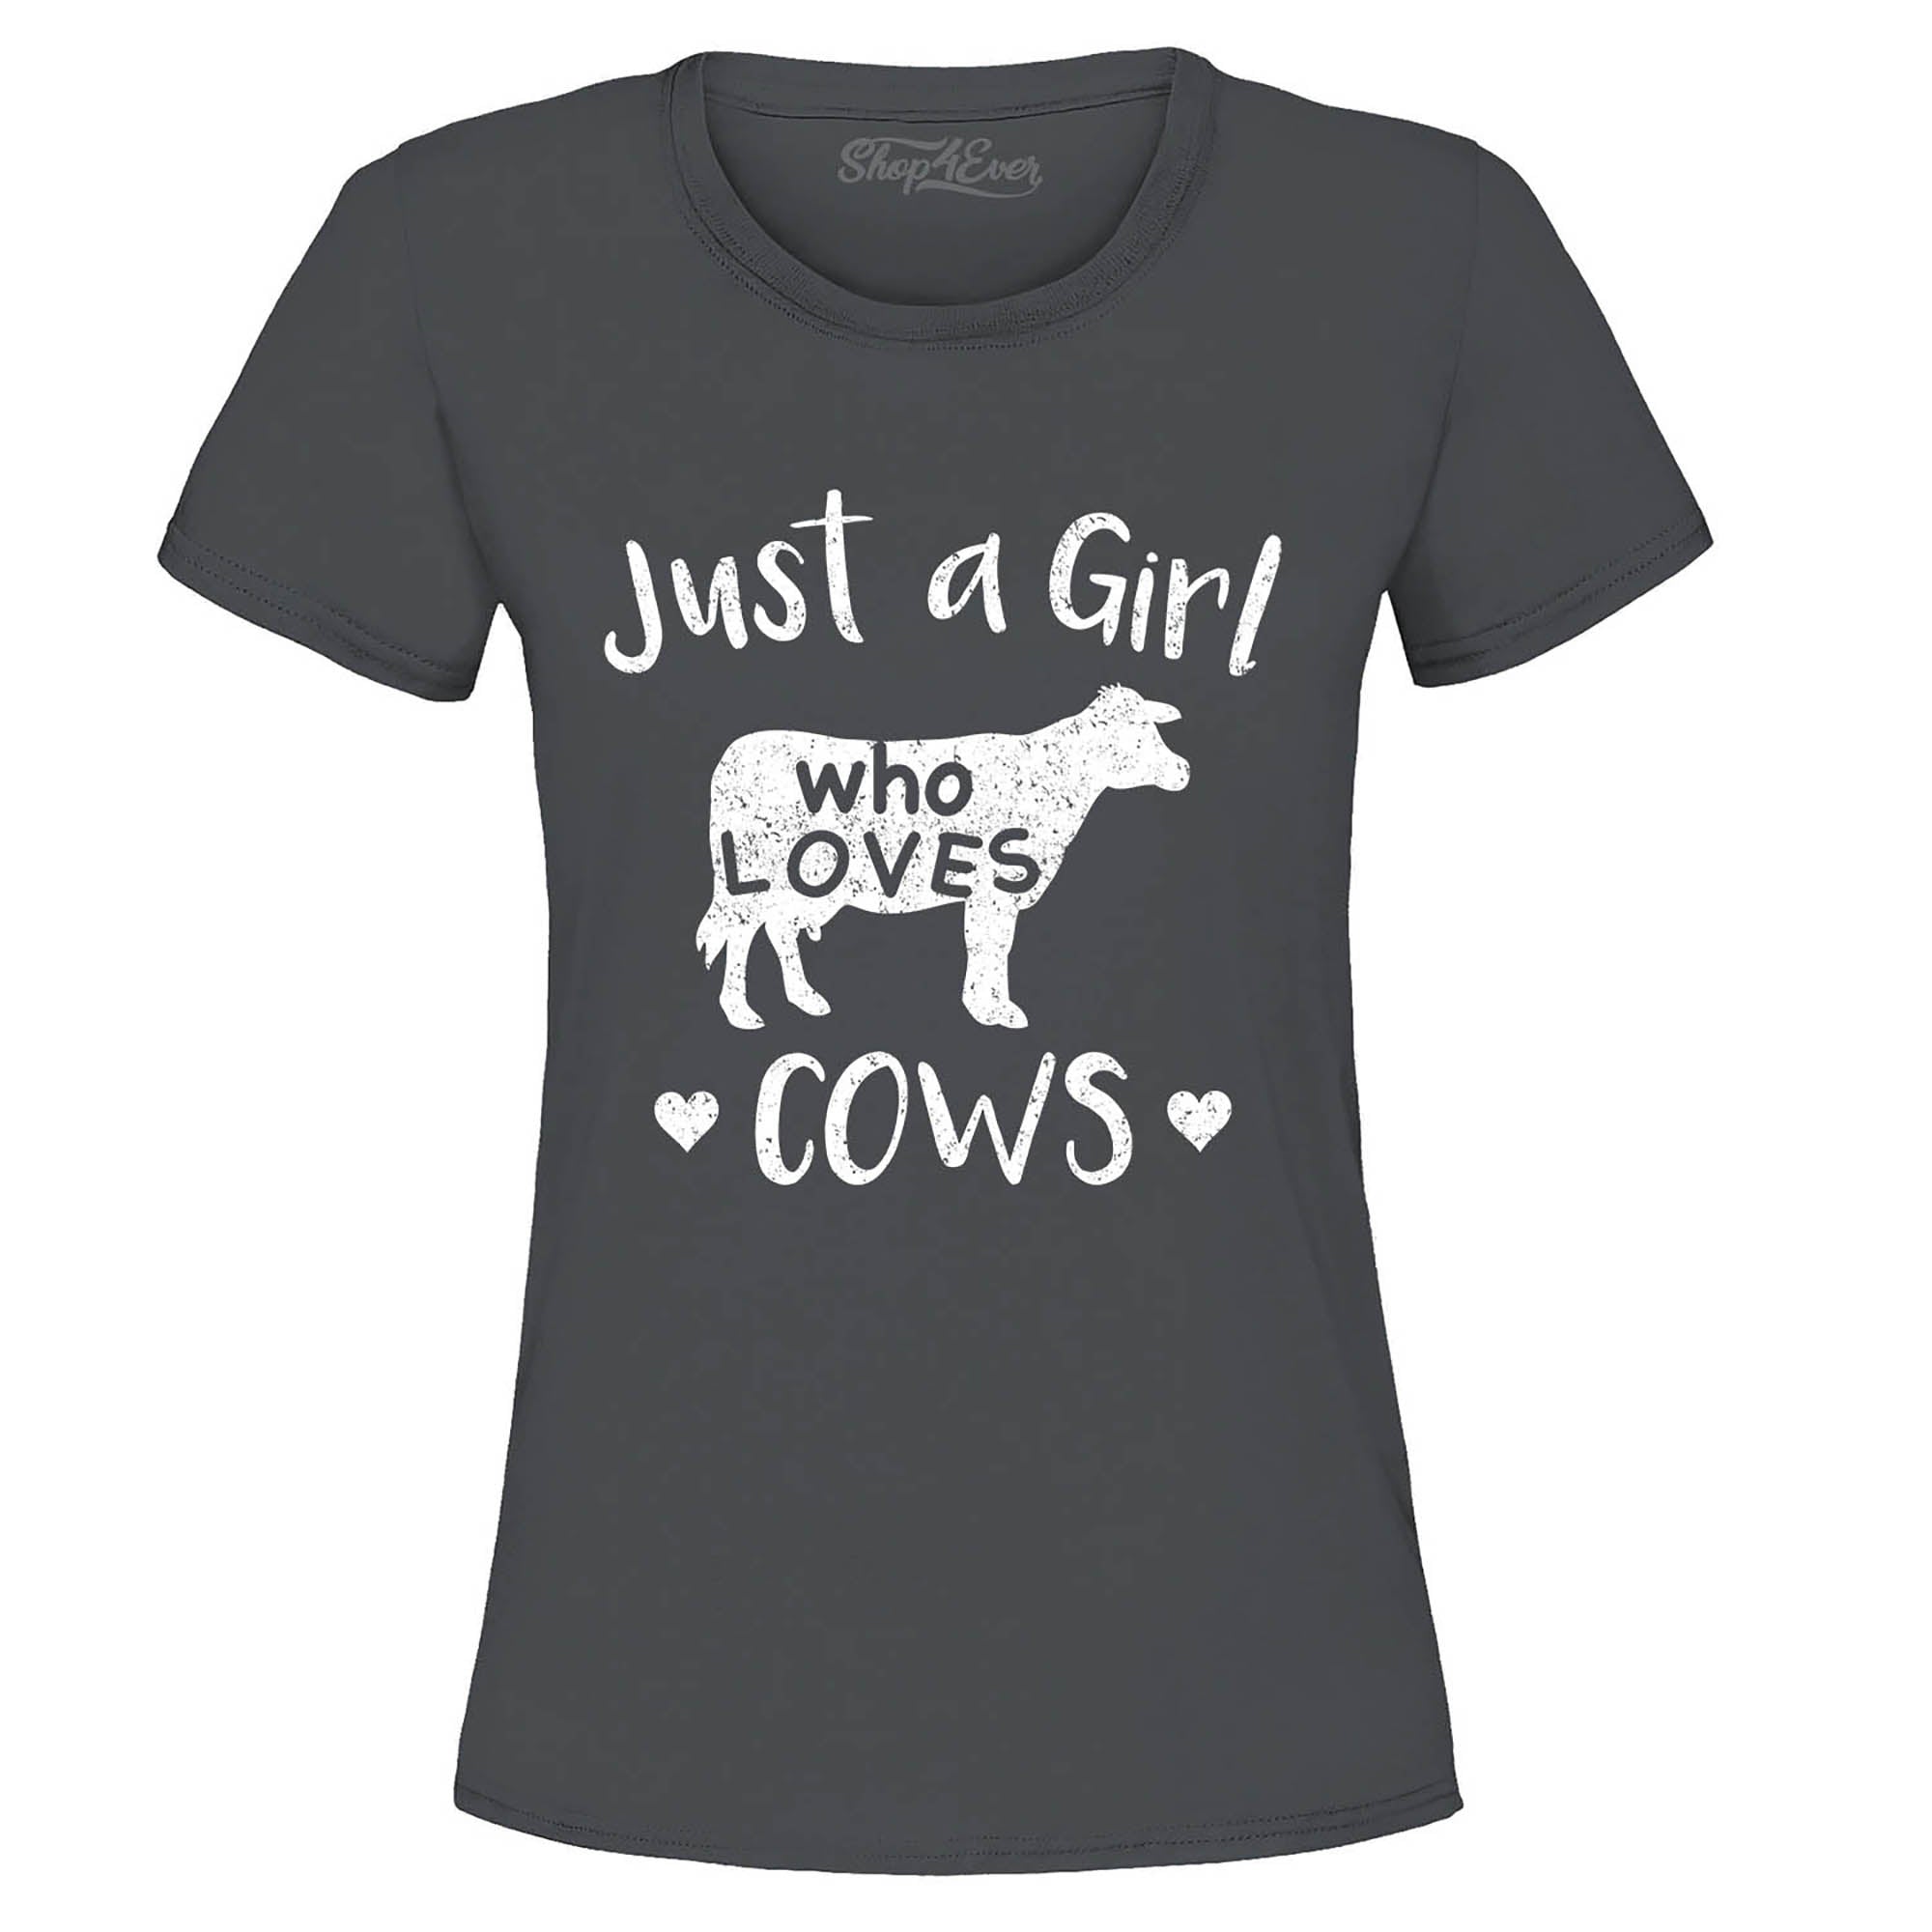 Just A Girl Who Loves Cows Women's T-Shirt